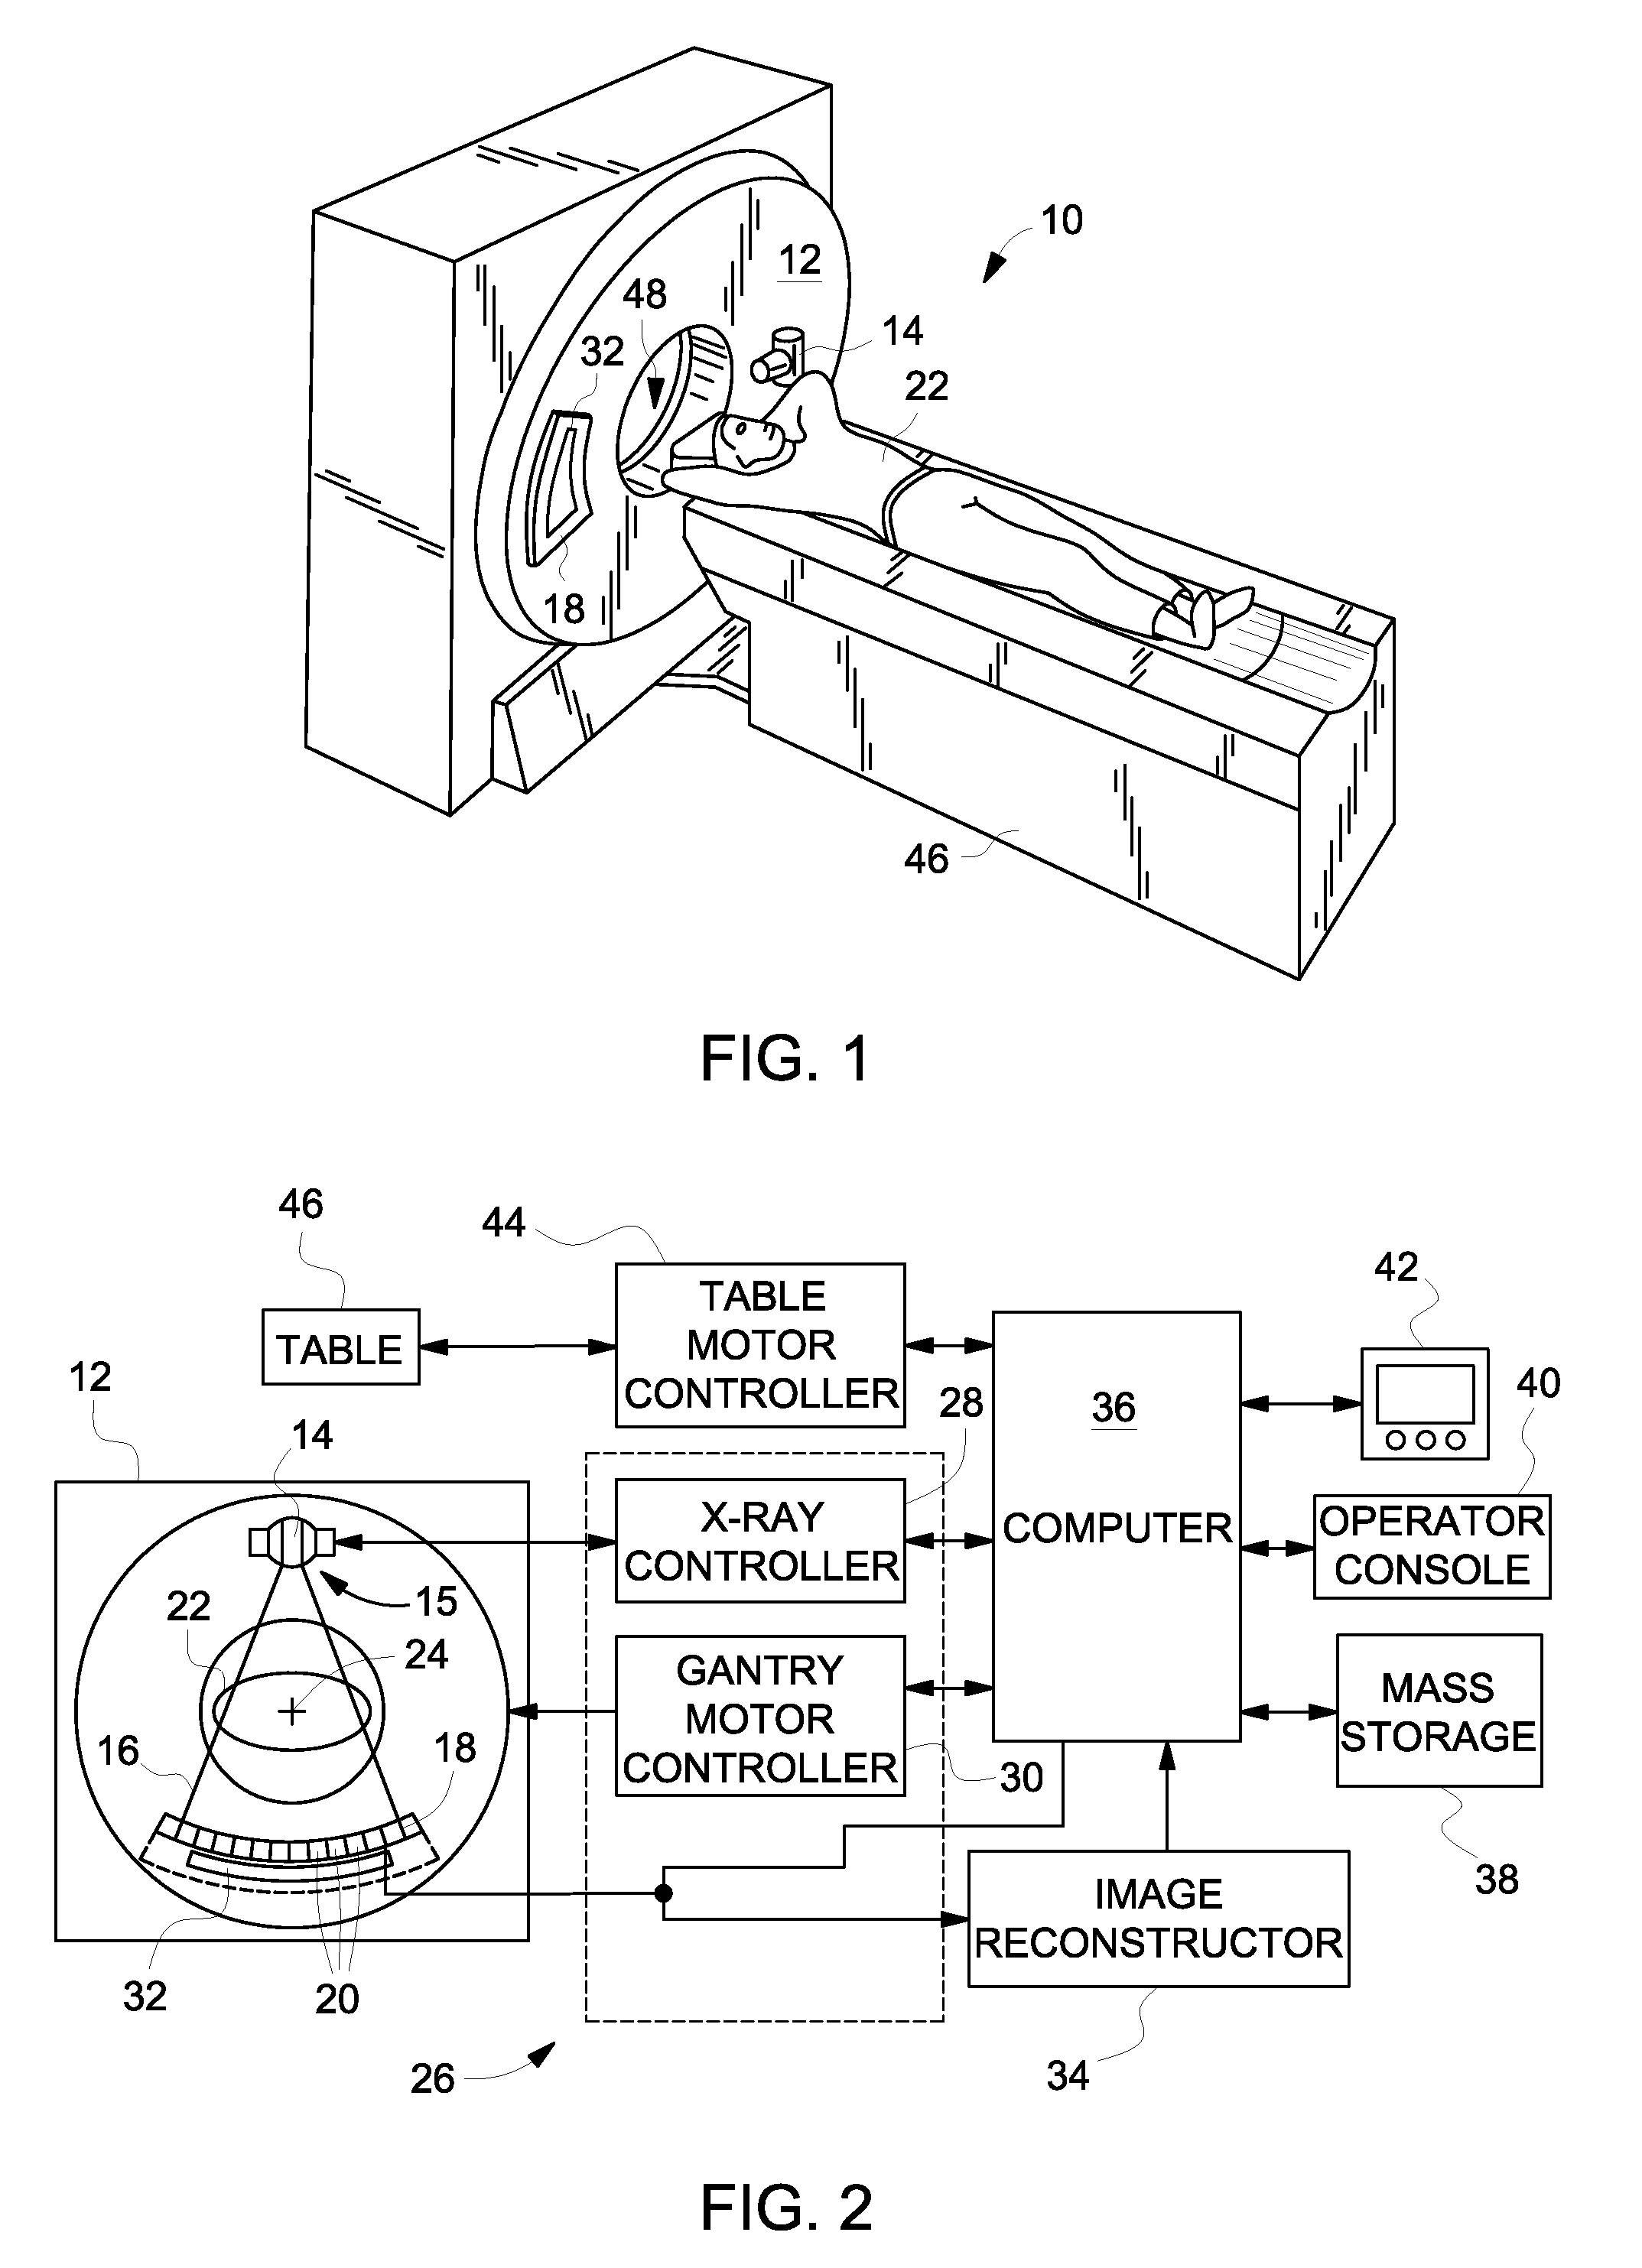 Multi-faceted tileable detector for volumetric computed tomography imaging